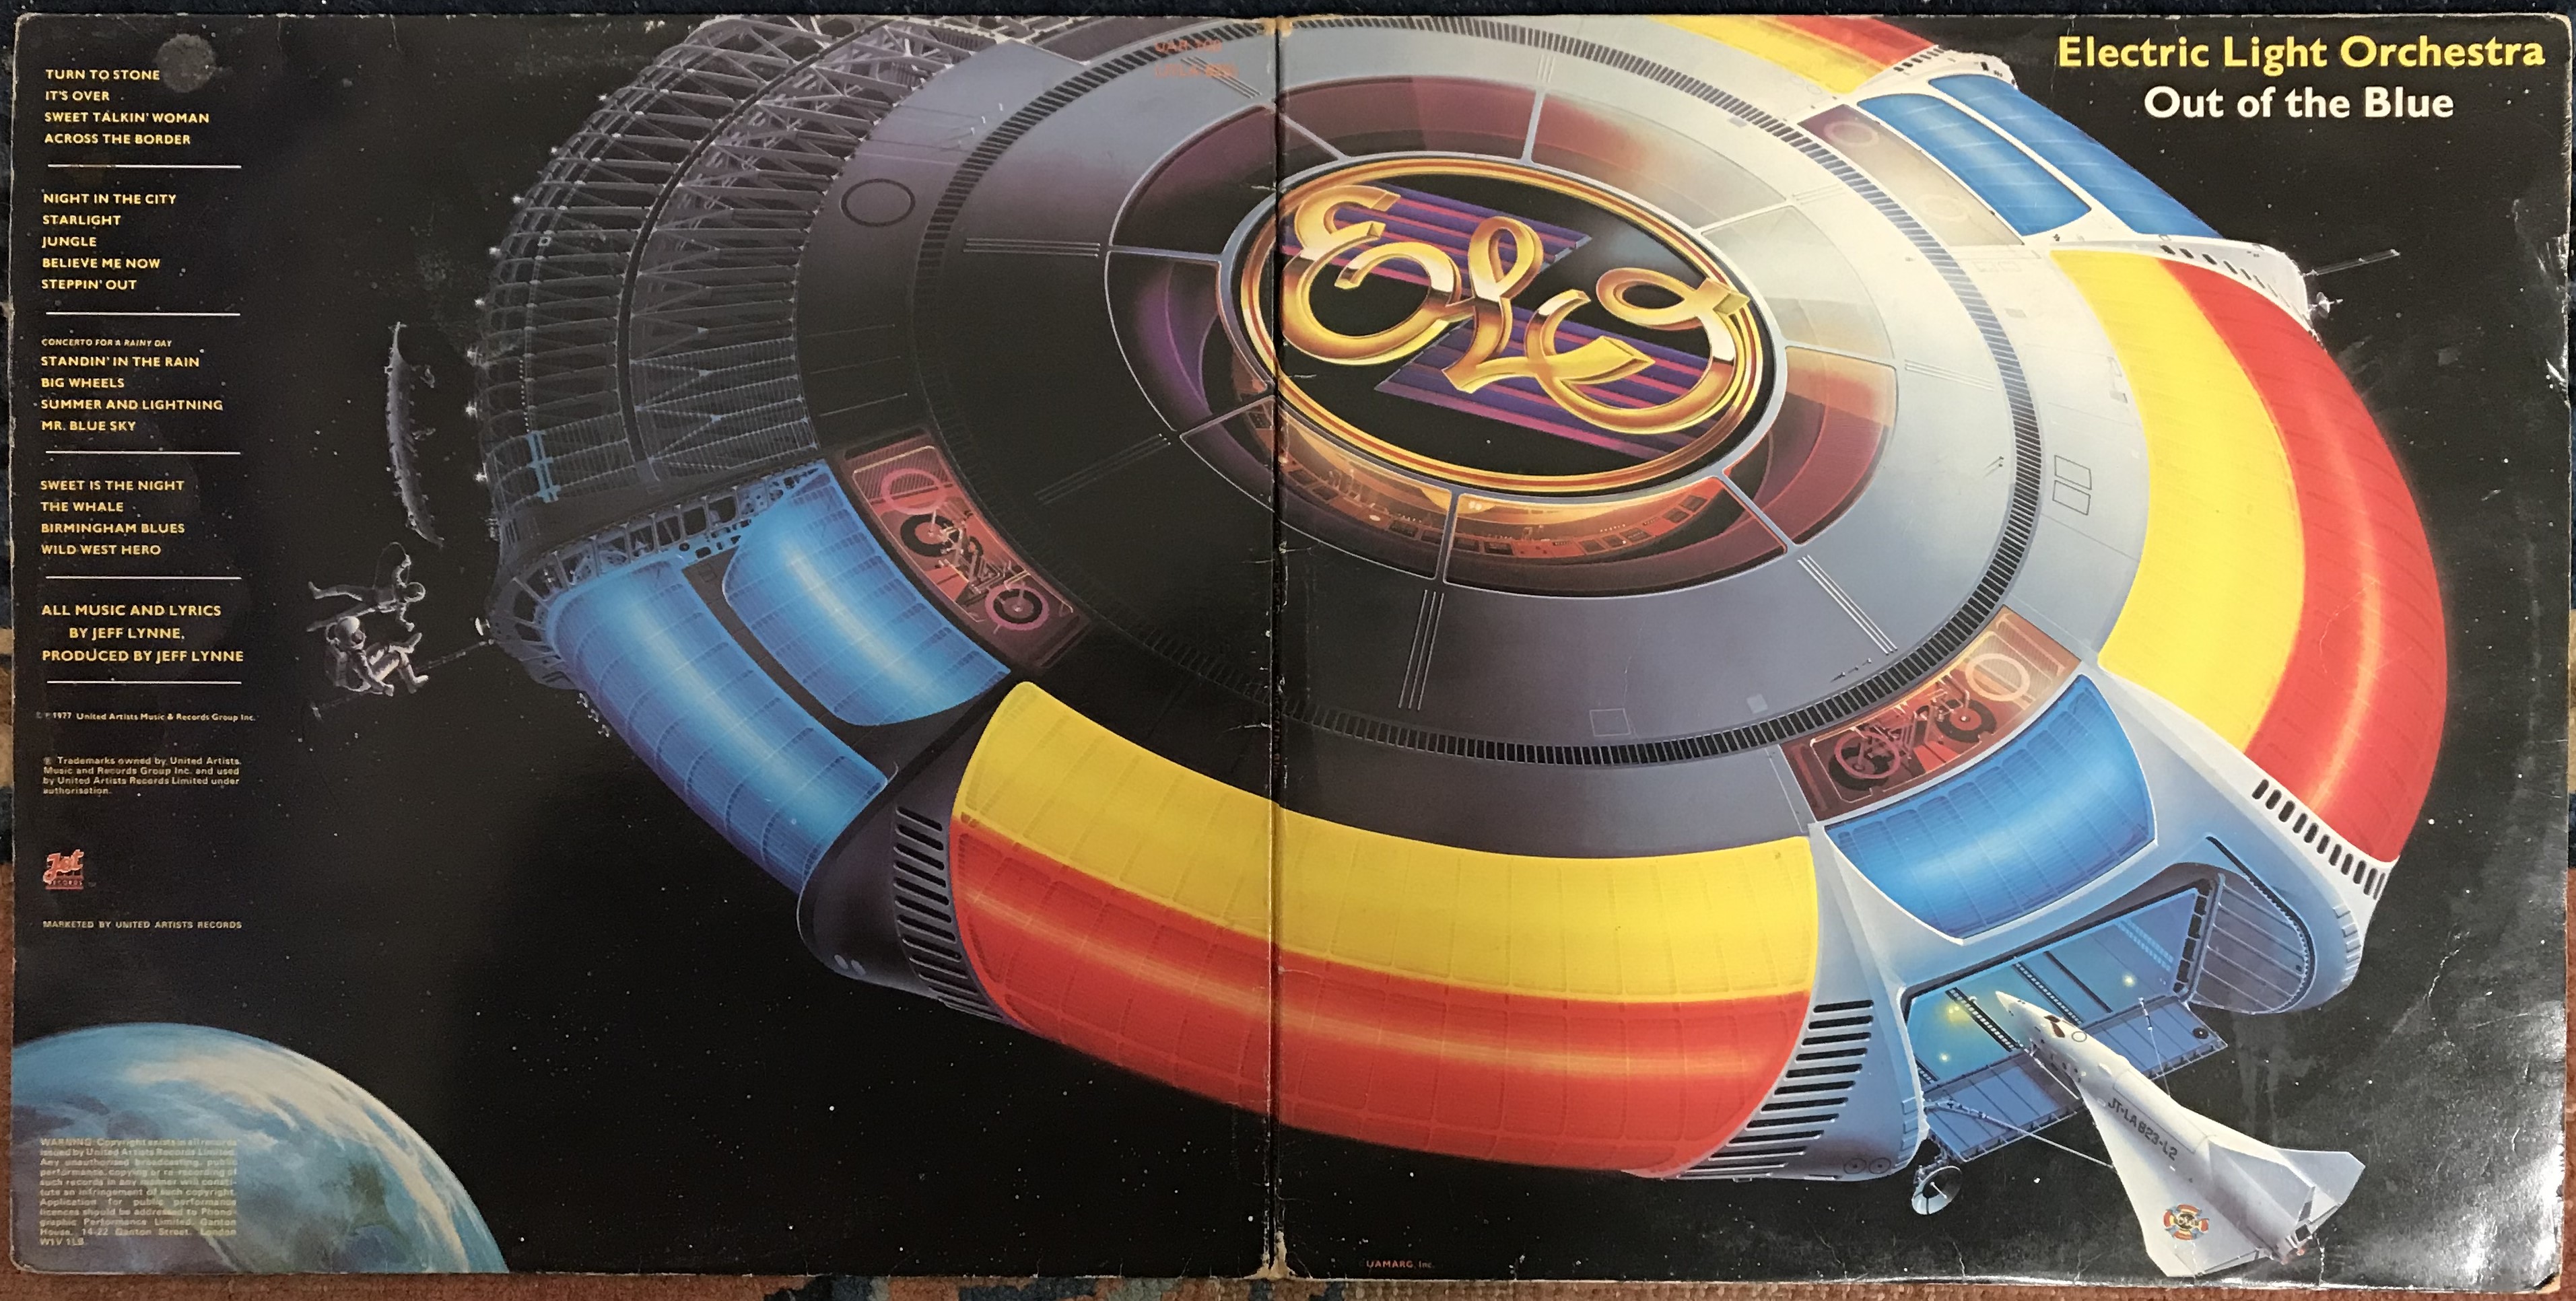 ELECTRIC LIGHT ORCHESTRA - Discovery (gatefold), Out of the Blue (double album gatefold), - Image 4 of 5